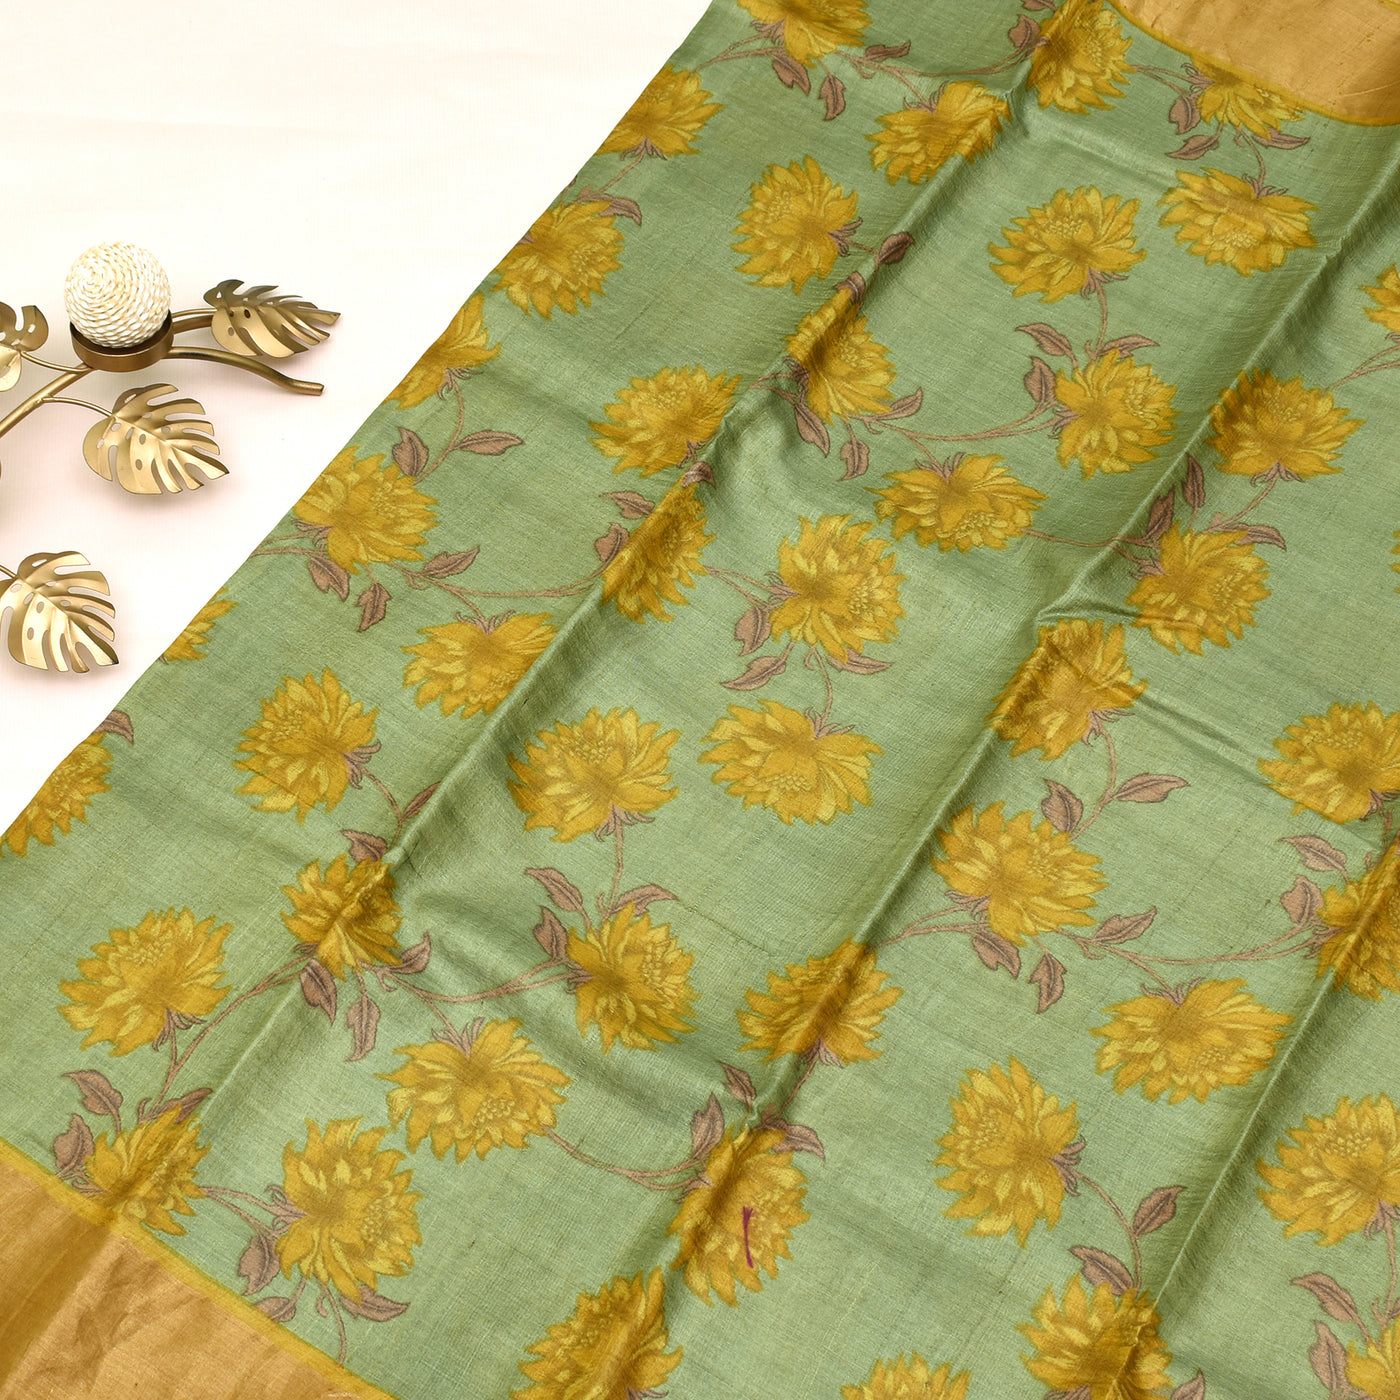 Apple Green Tussar Printed Saree with Floral Design